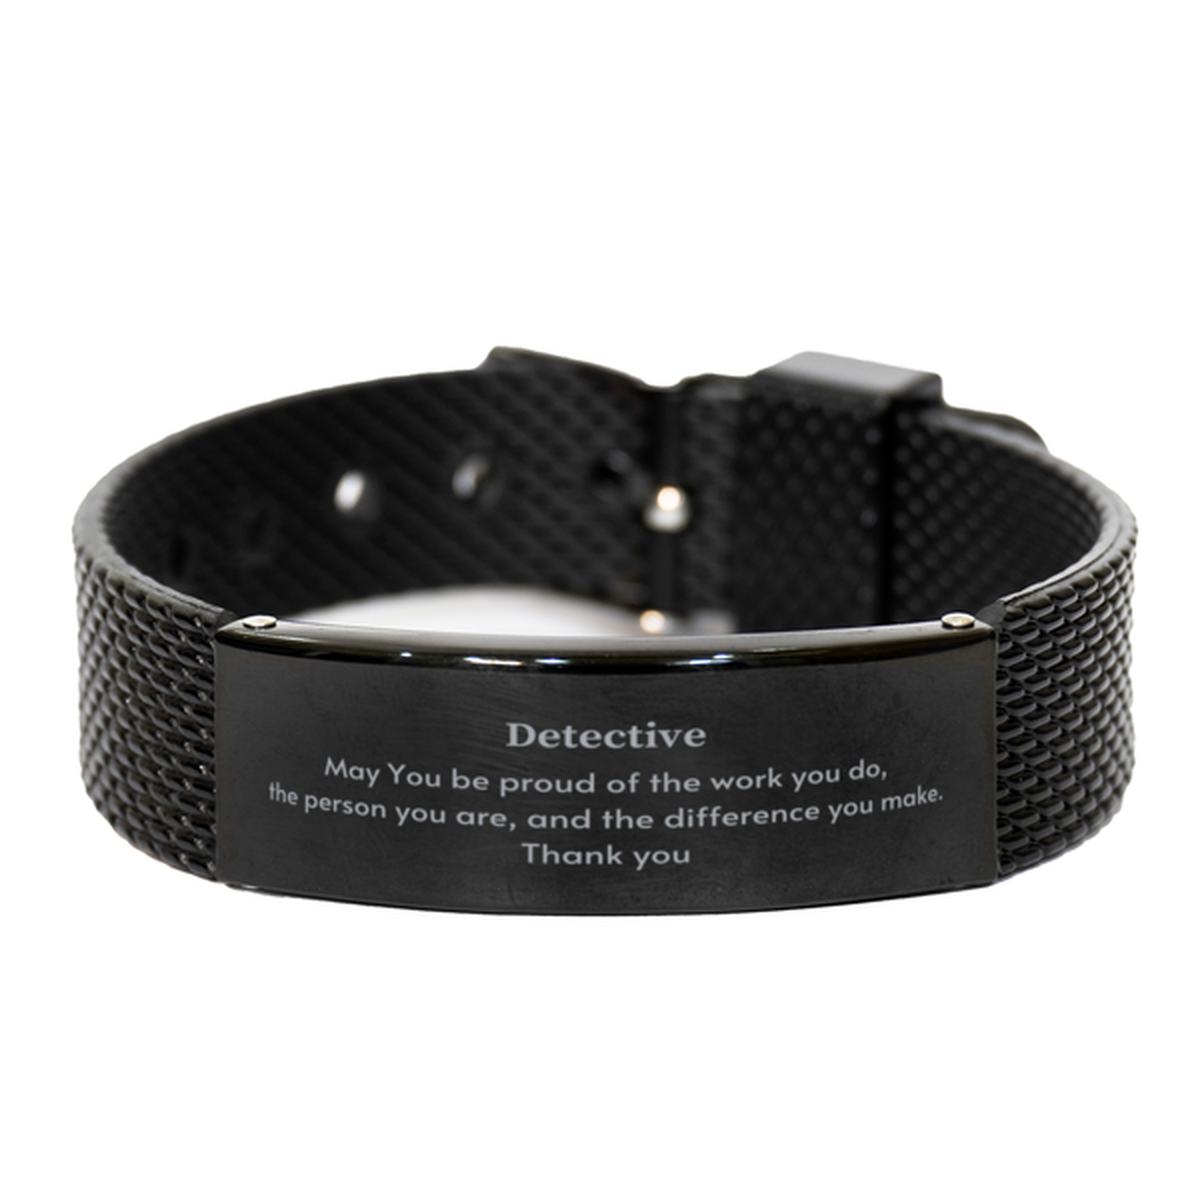 Heartwarming Black Shark Mesh Bracelet Retirement Coworkers Gifts for Detective, Detective May You be proud of the work you do, the person you are Gifts for Boss Men Women Friends